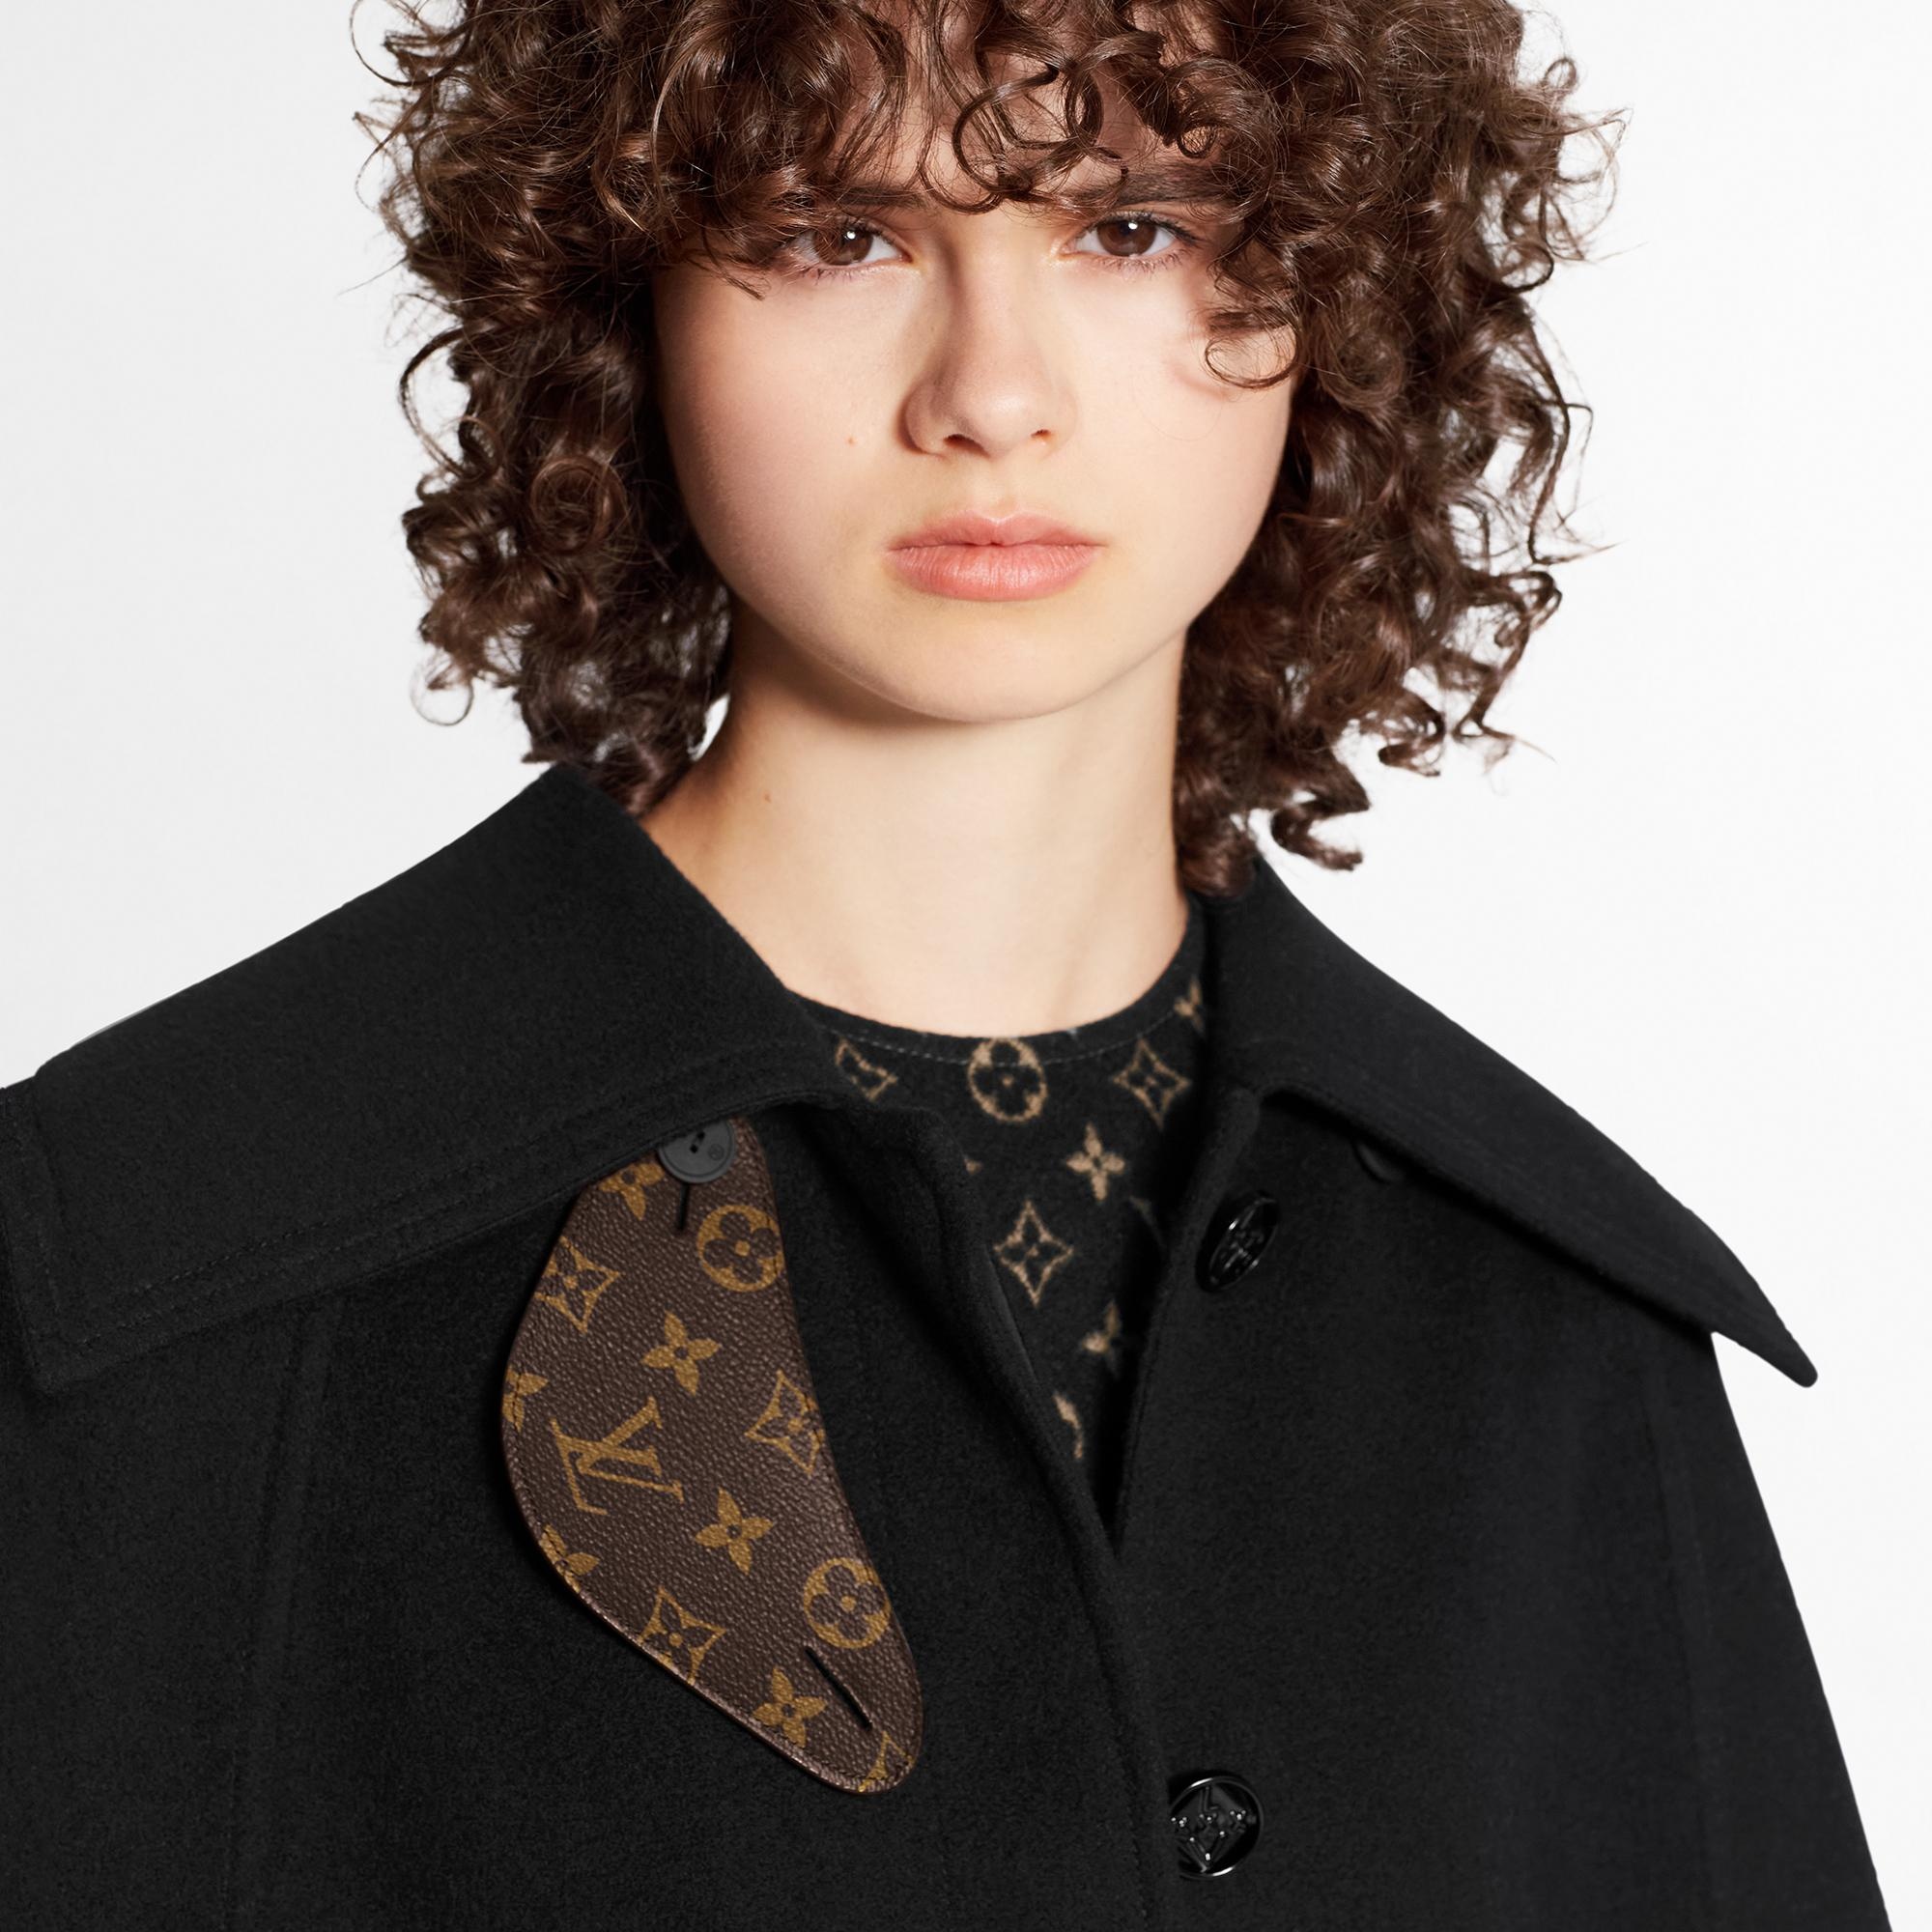 Products By Louis Vuitton: Wide Collar Sleek Cape Coat